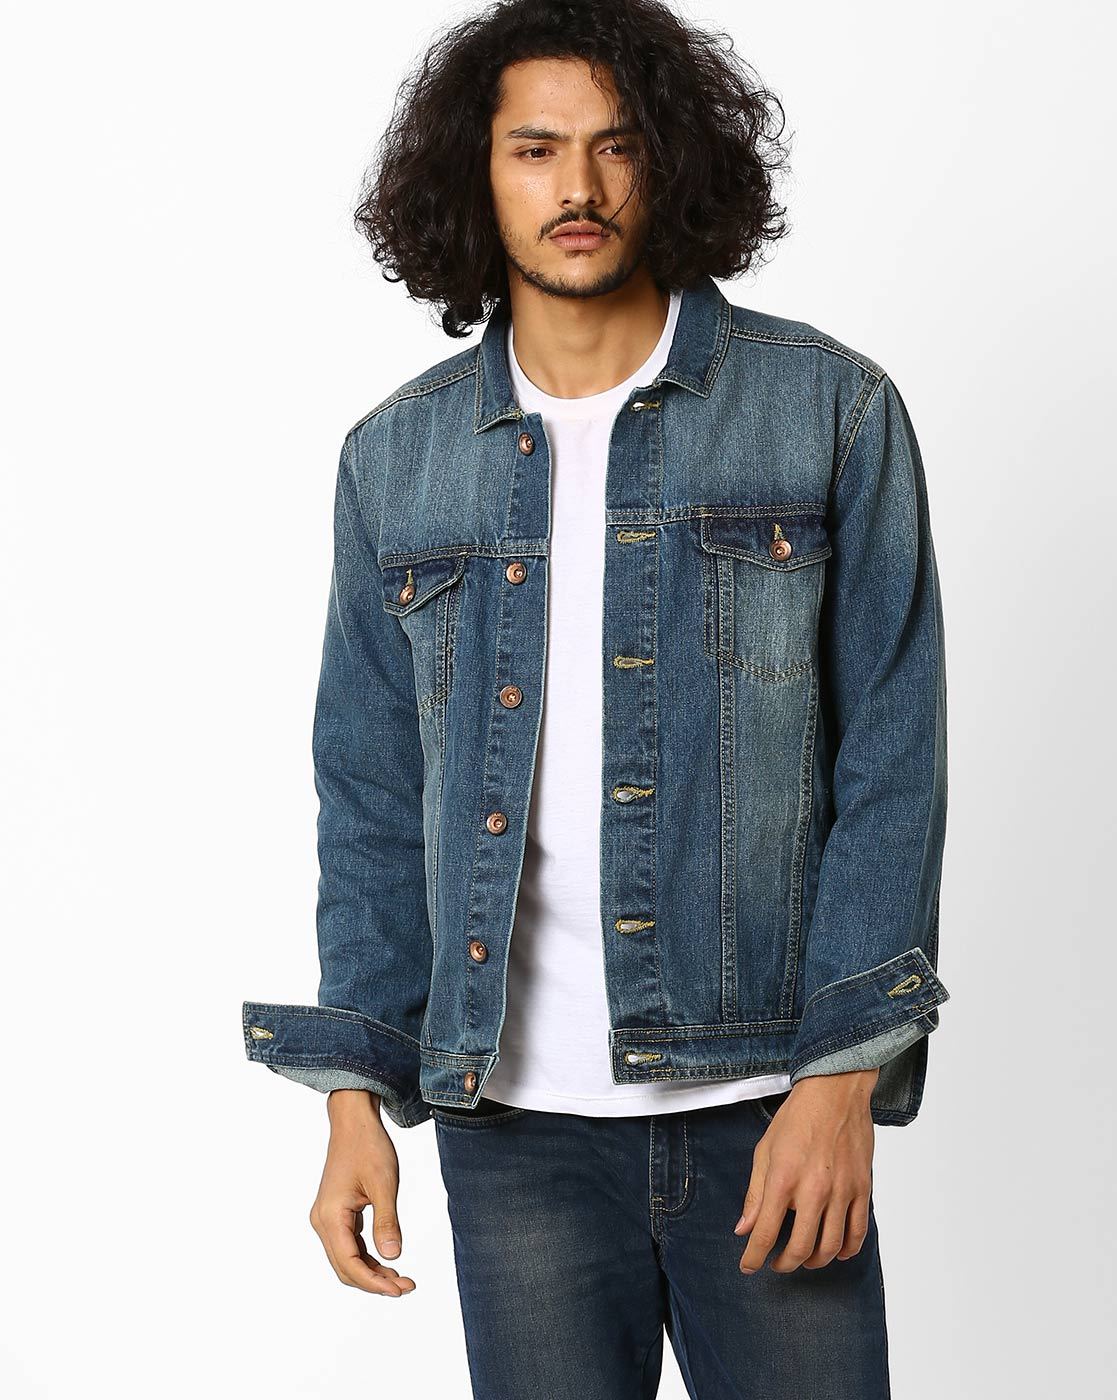 trendy jean jacket outfits